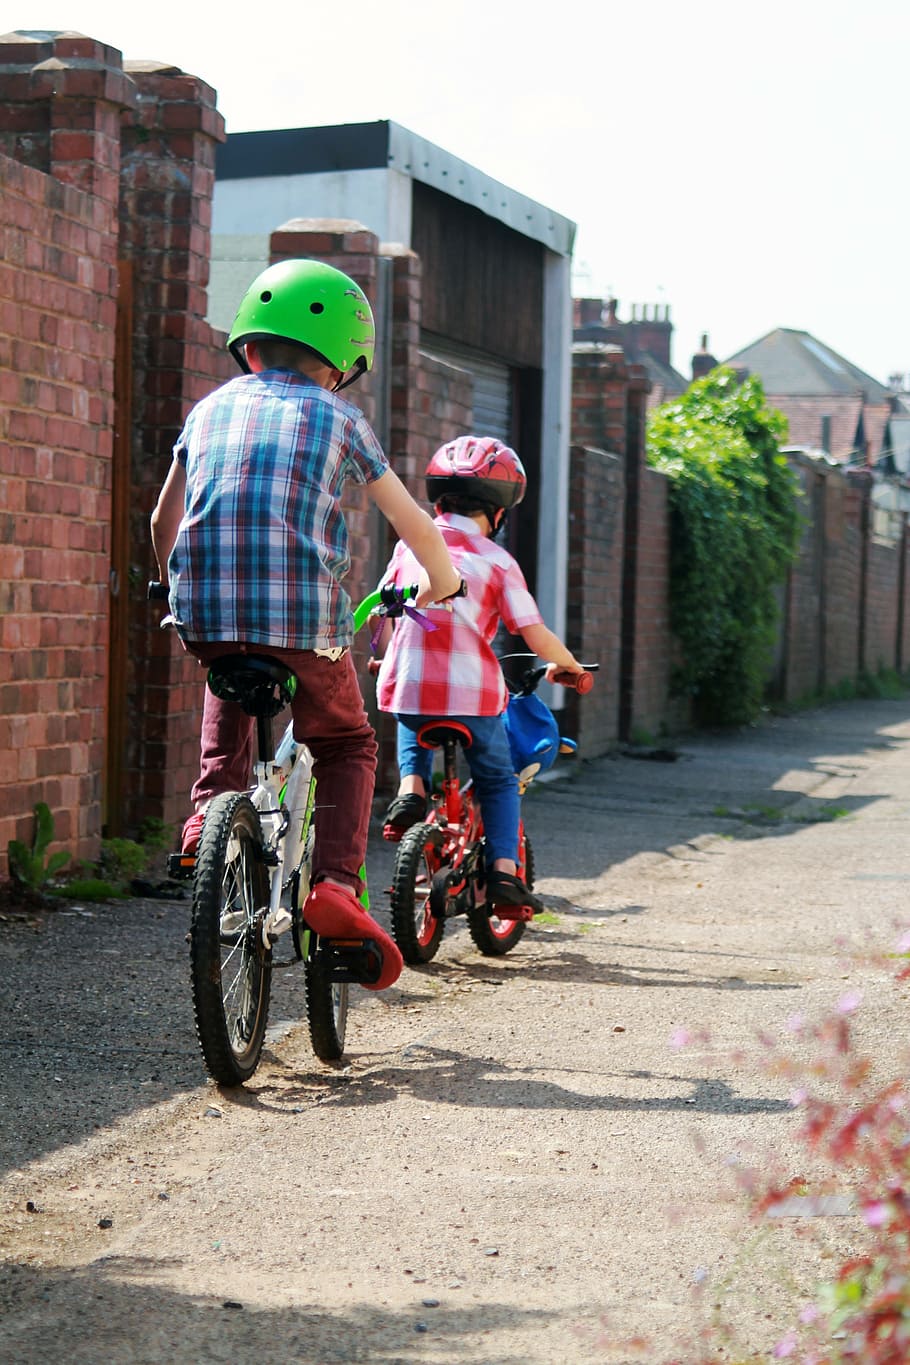 two children riding the bike, alley, bicycles, bicyclists, bikes